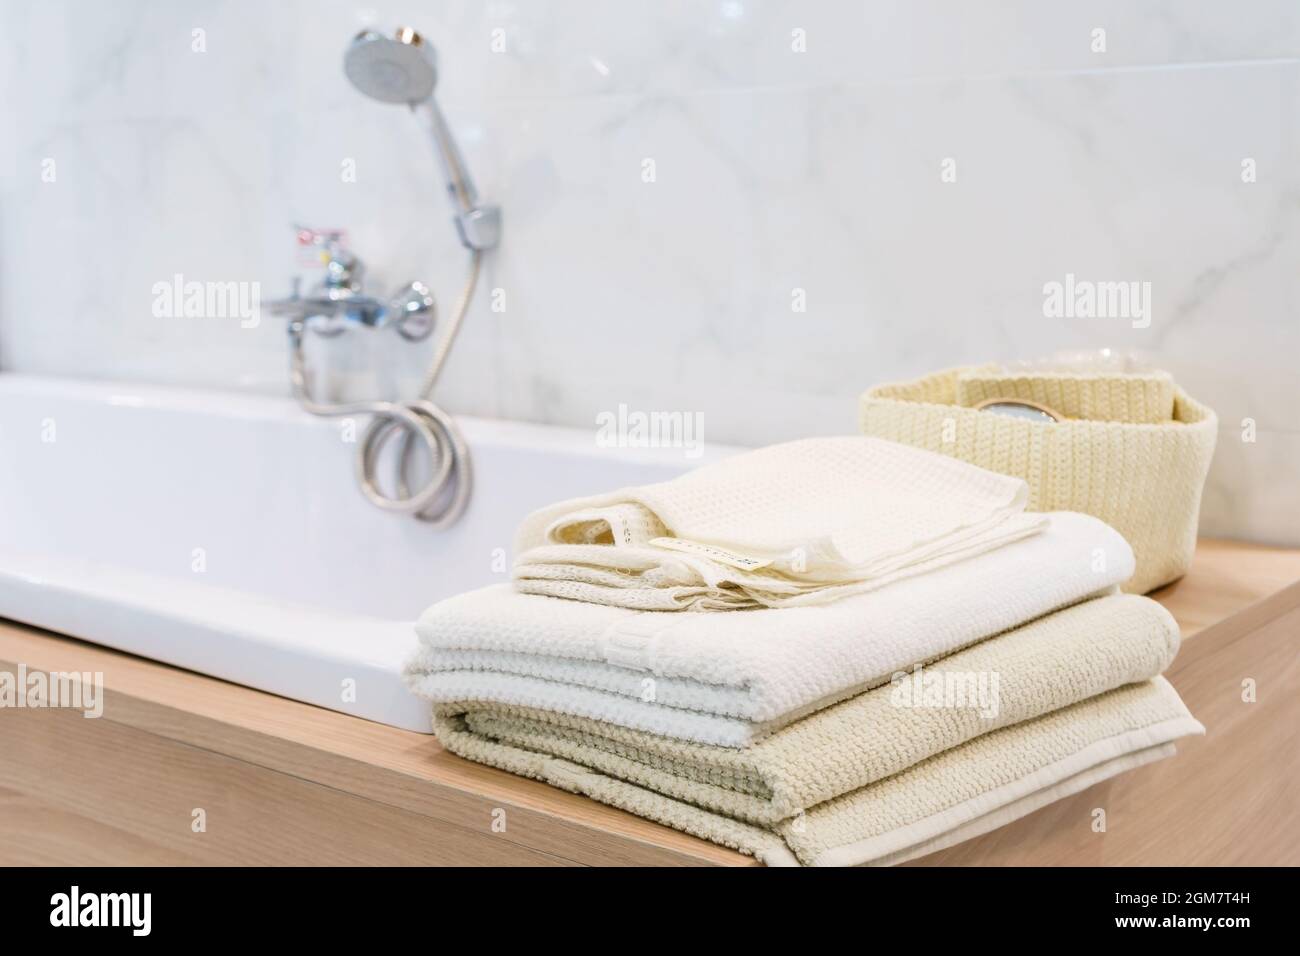 White towel lies on bathtab in bathroom in the background Stock Photo